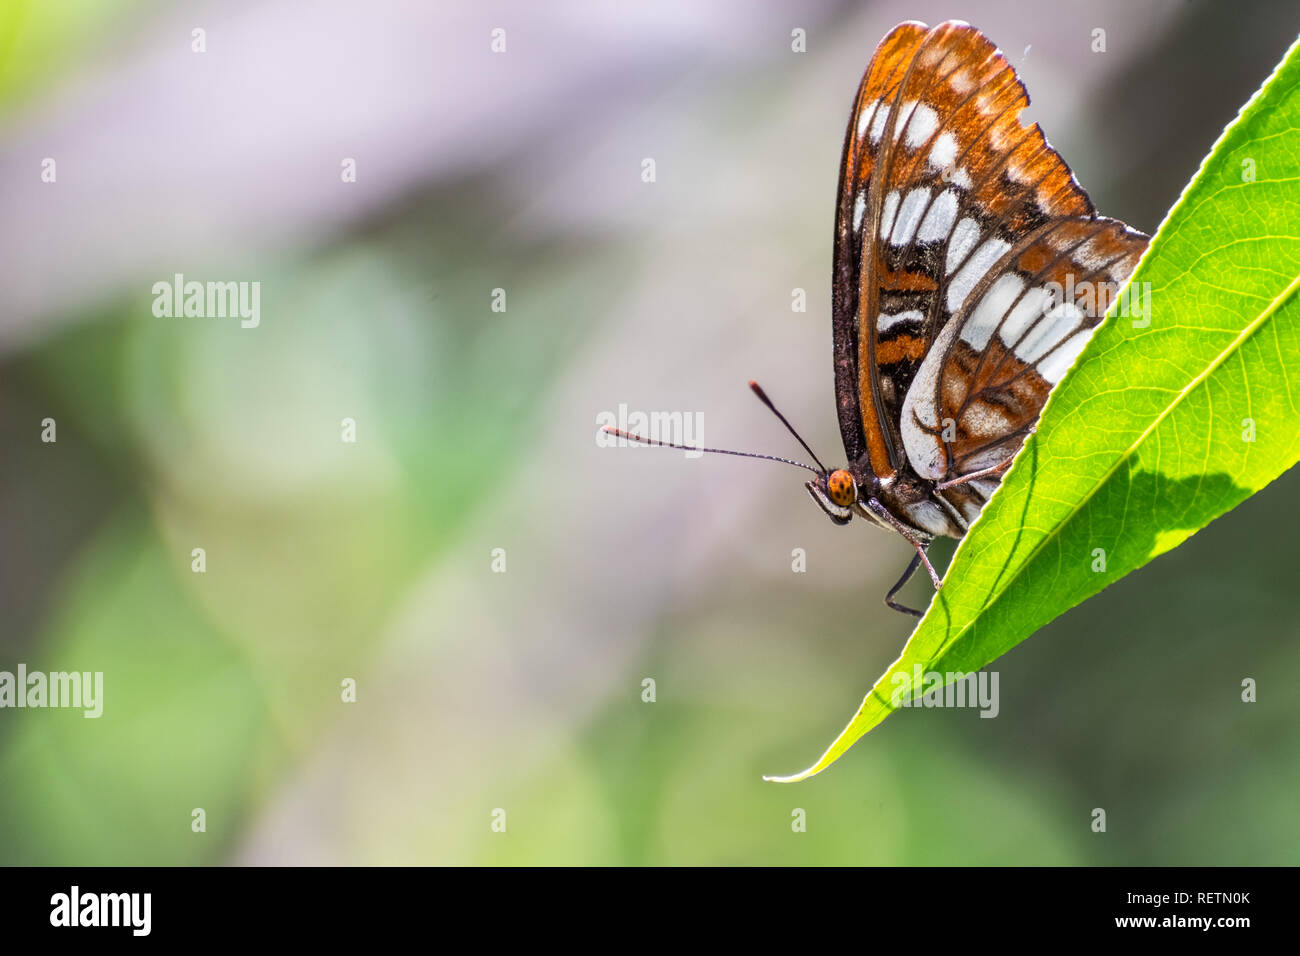 Lorquin's admiral (Limenitis lorquini) butterfly sitting with its wings closed on a green leaf, south San Francisco bay area, California; blurred back Stock Photo